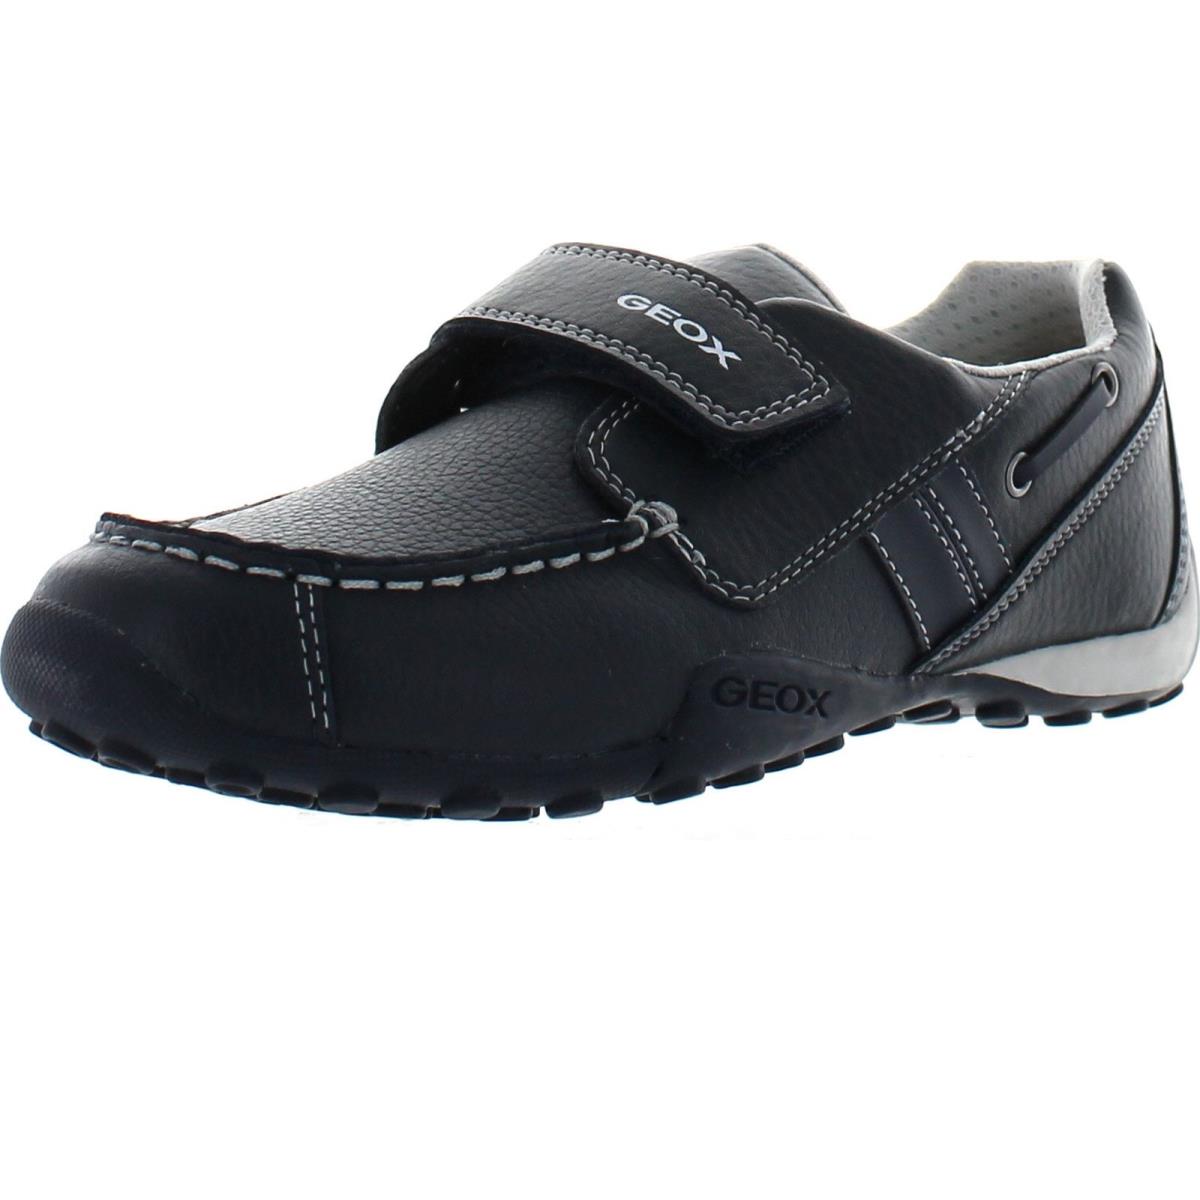 Geox Boys Jr Snake Moc Dress Casual Loafers Shoes Navy/Grey